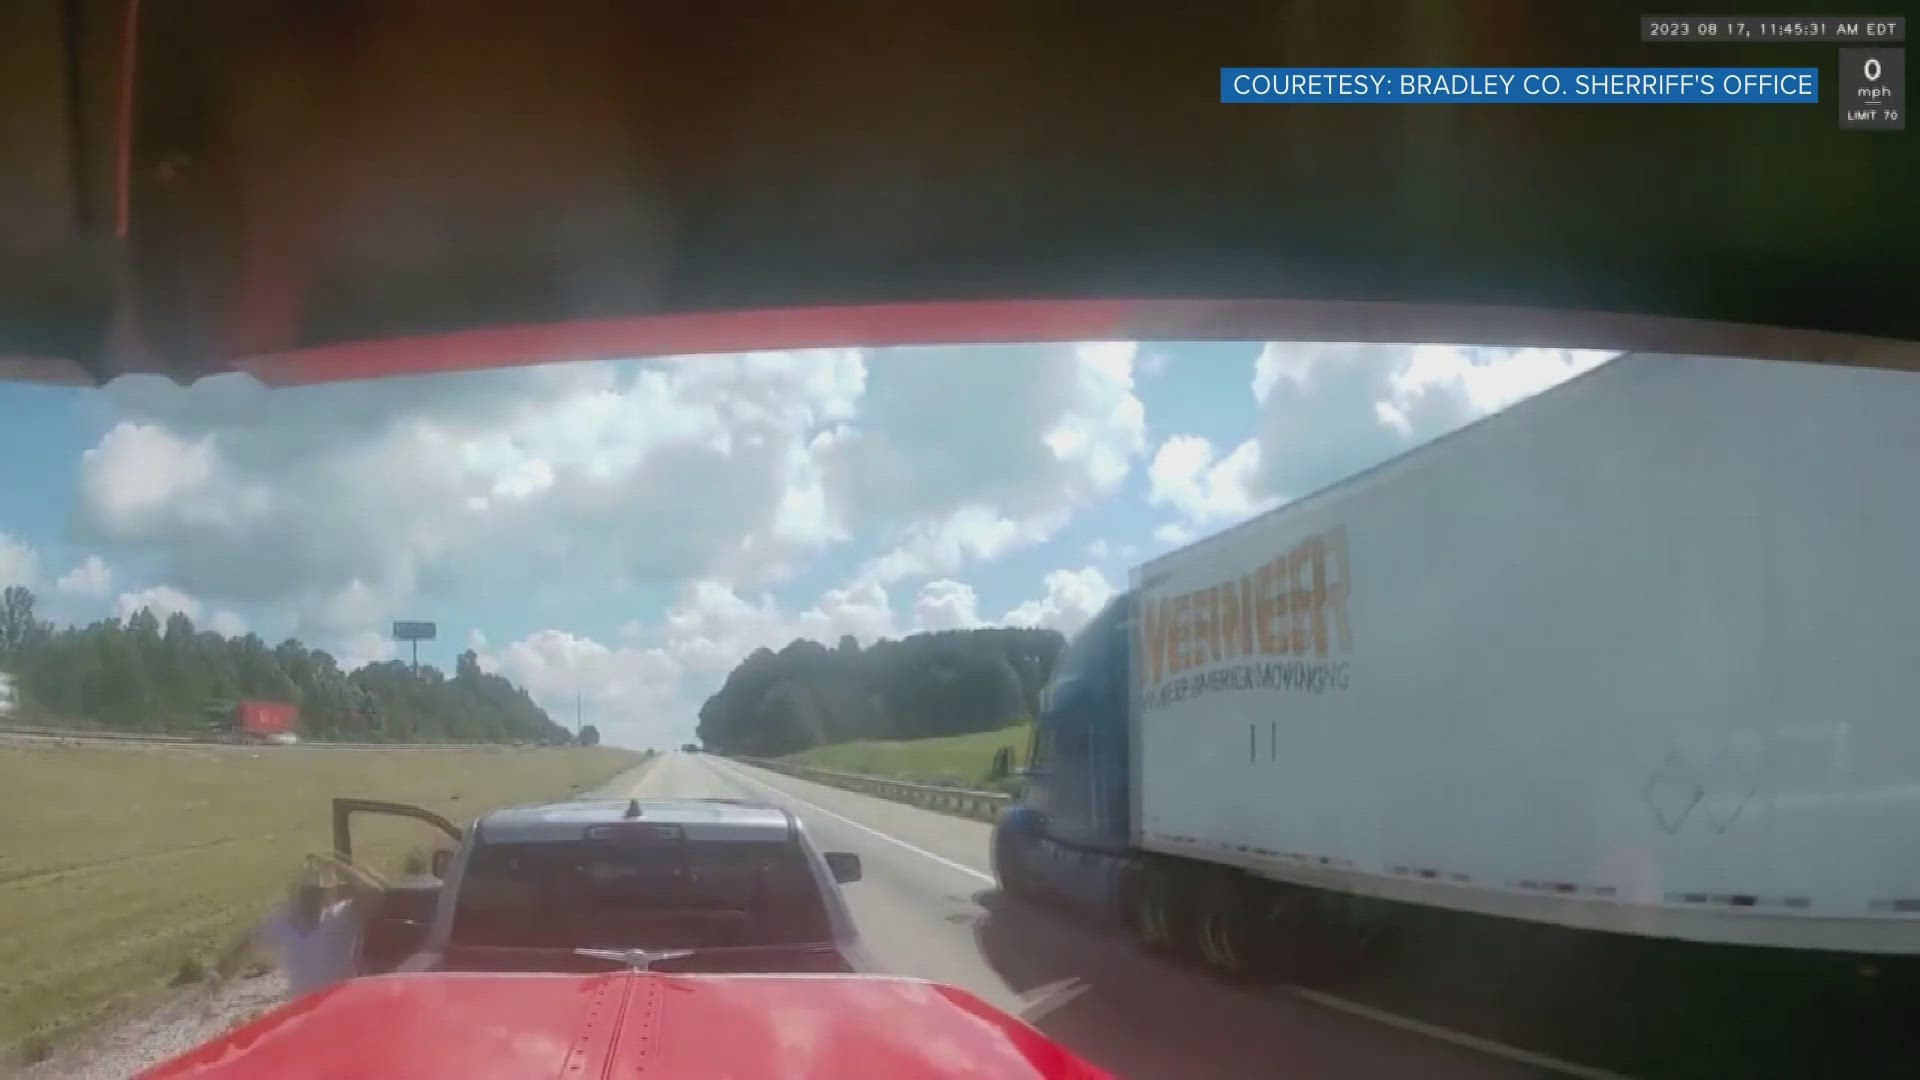 The Bradley County Sheriff's Office said the incident happened on Aug. 17 at around 11:45 a.m. on I-75.